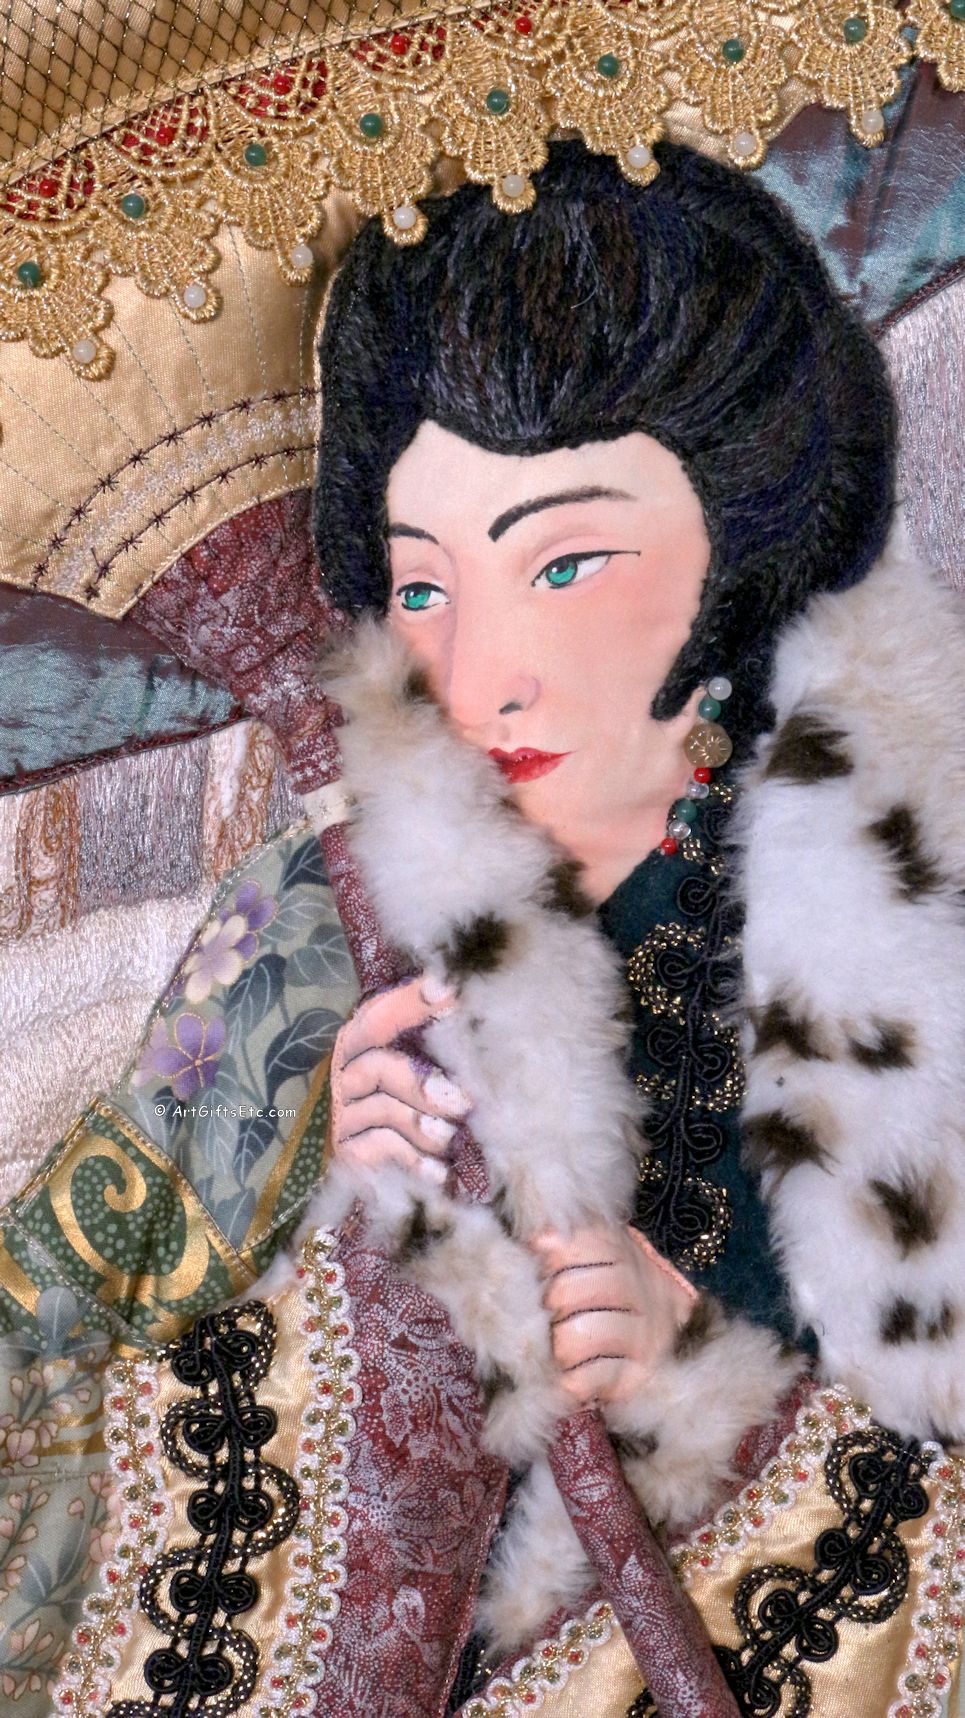 Detail-Geisha In The Snow-Step-By-Step Blog